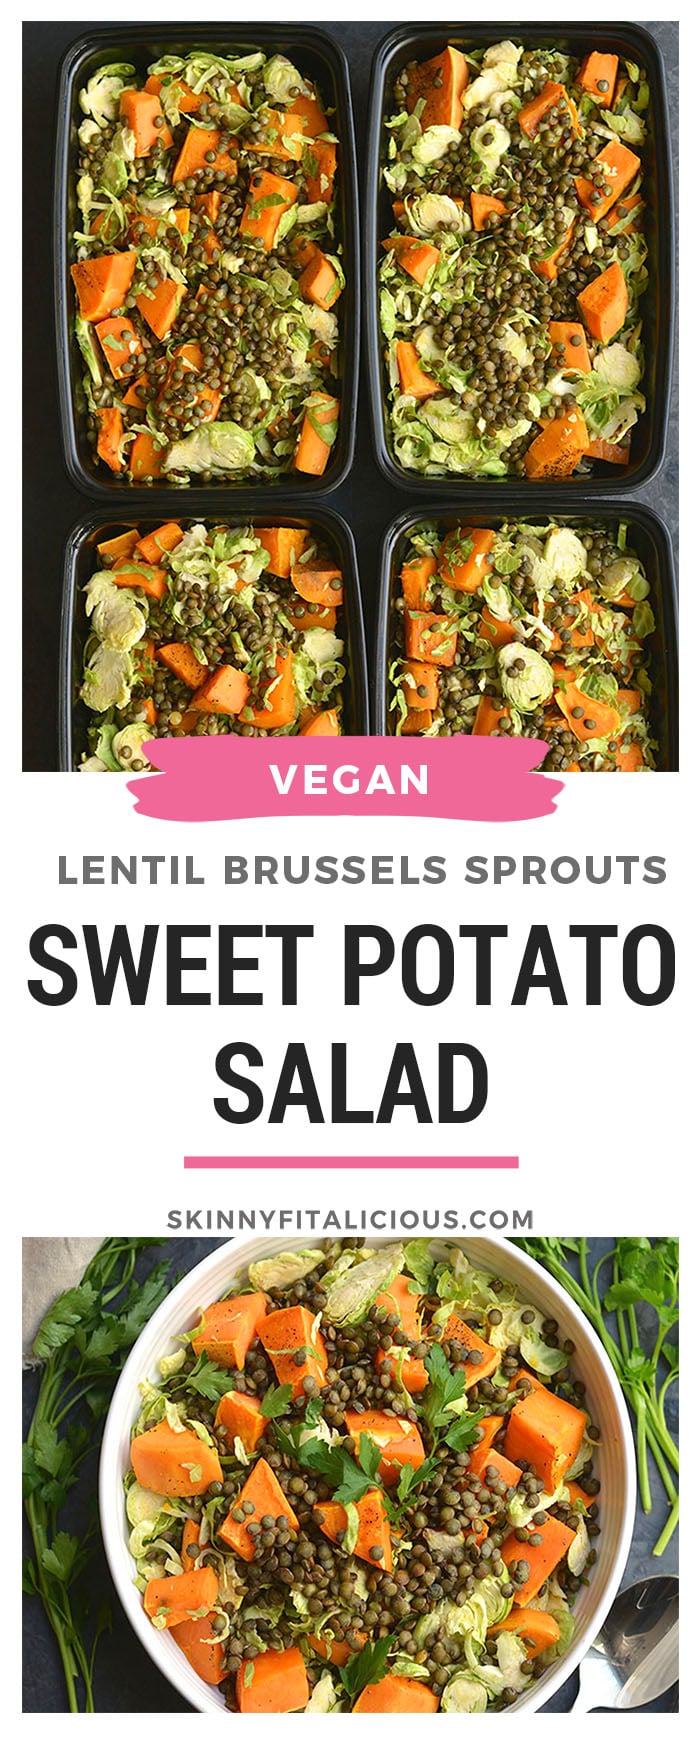 Lentil Brussels Sprouts Sweet Potato Salad! This quick salad is rich in plant based protein, filling & nourishing! A wholesome lunch or dinner that can be made ahead of time. Vegan + Gluten Free + Low Calorie